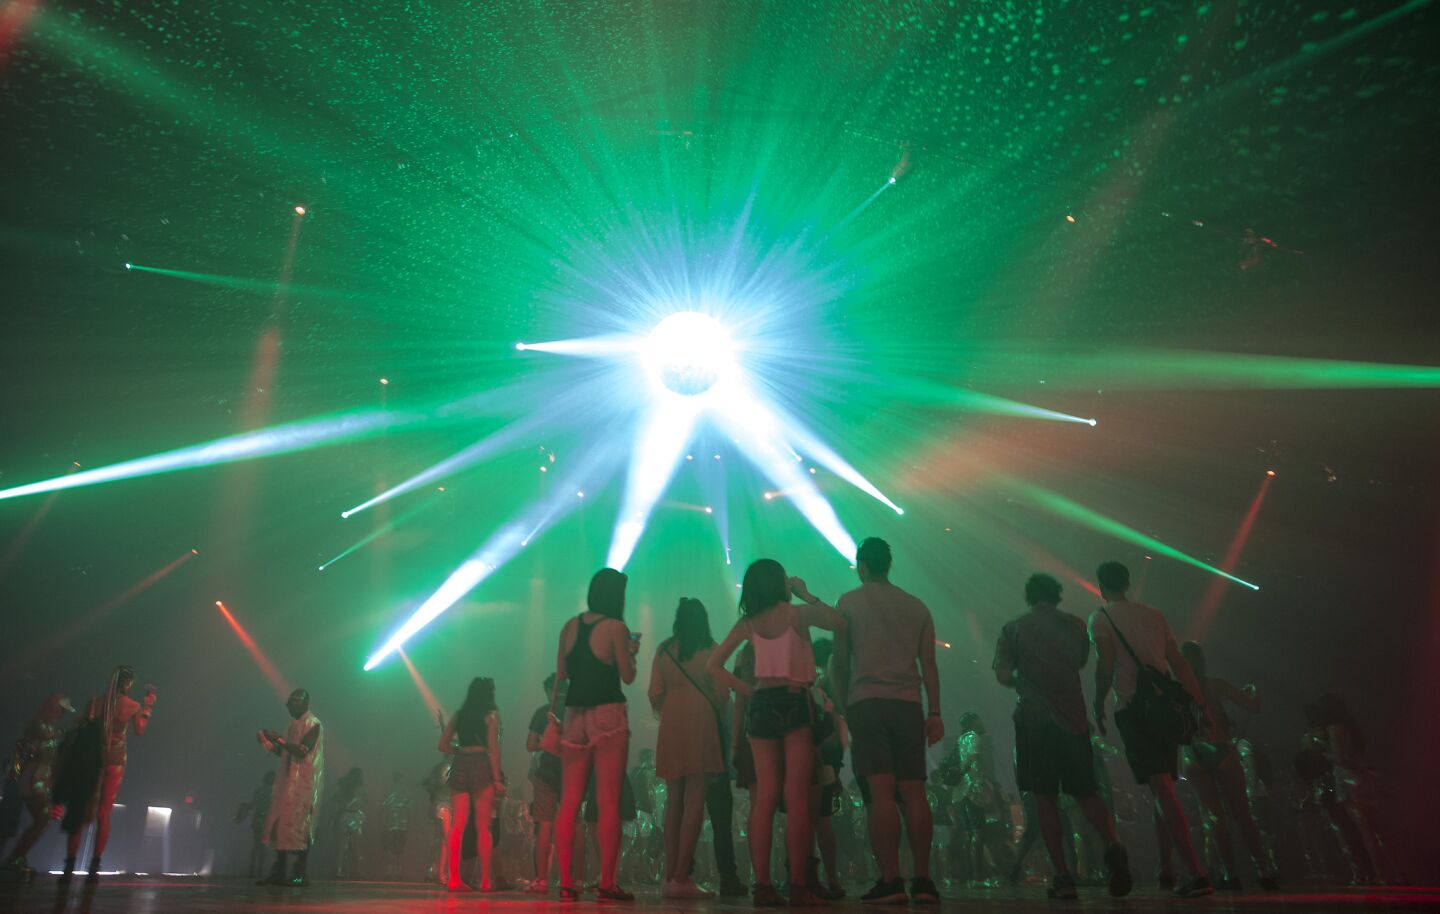 Festivalgoers groove in the Yuma tent at Coachella.